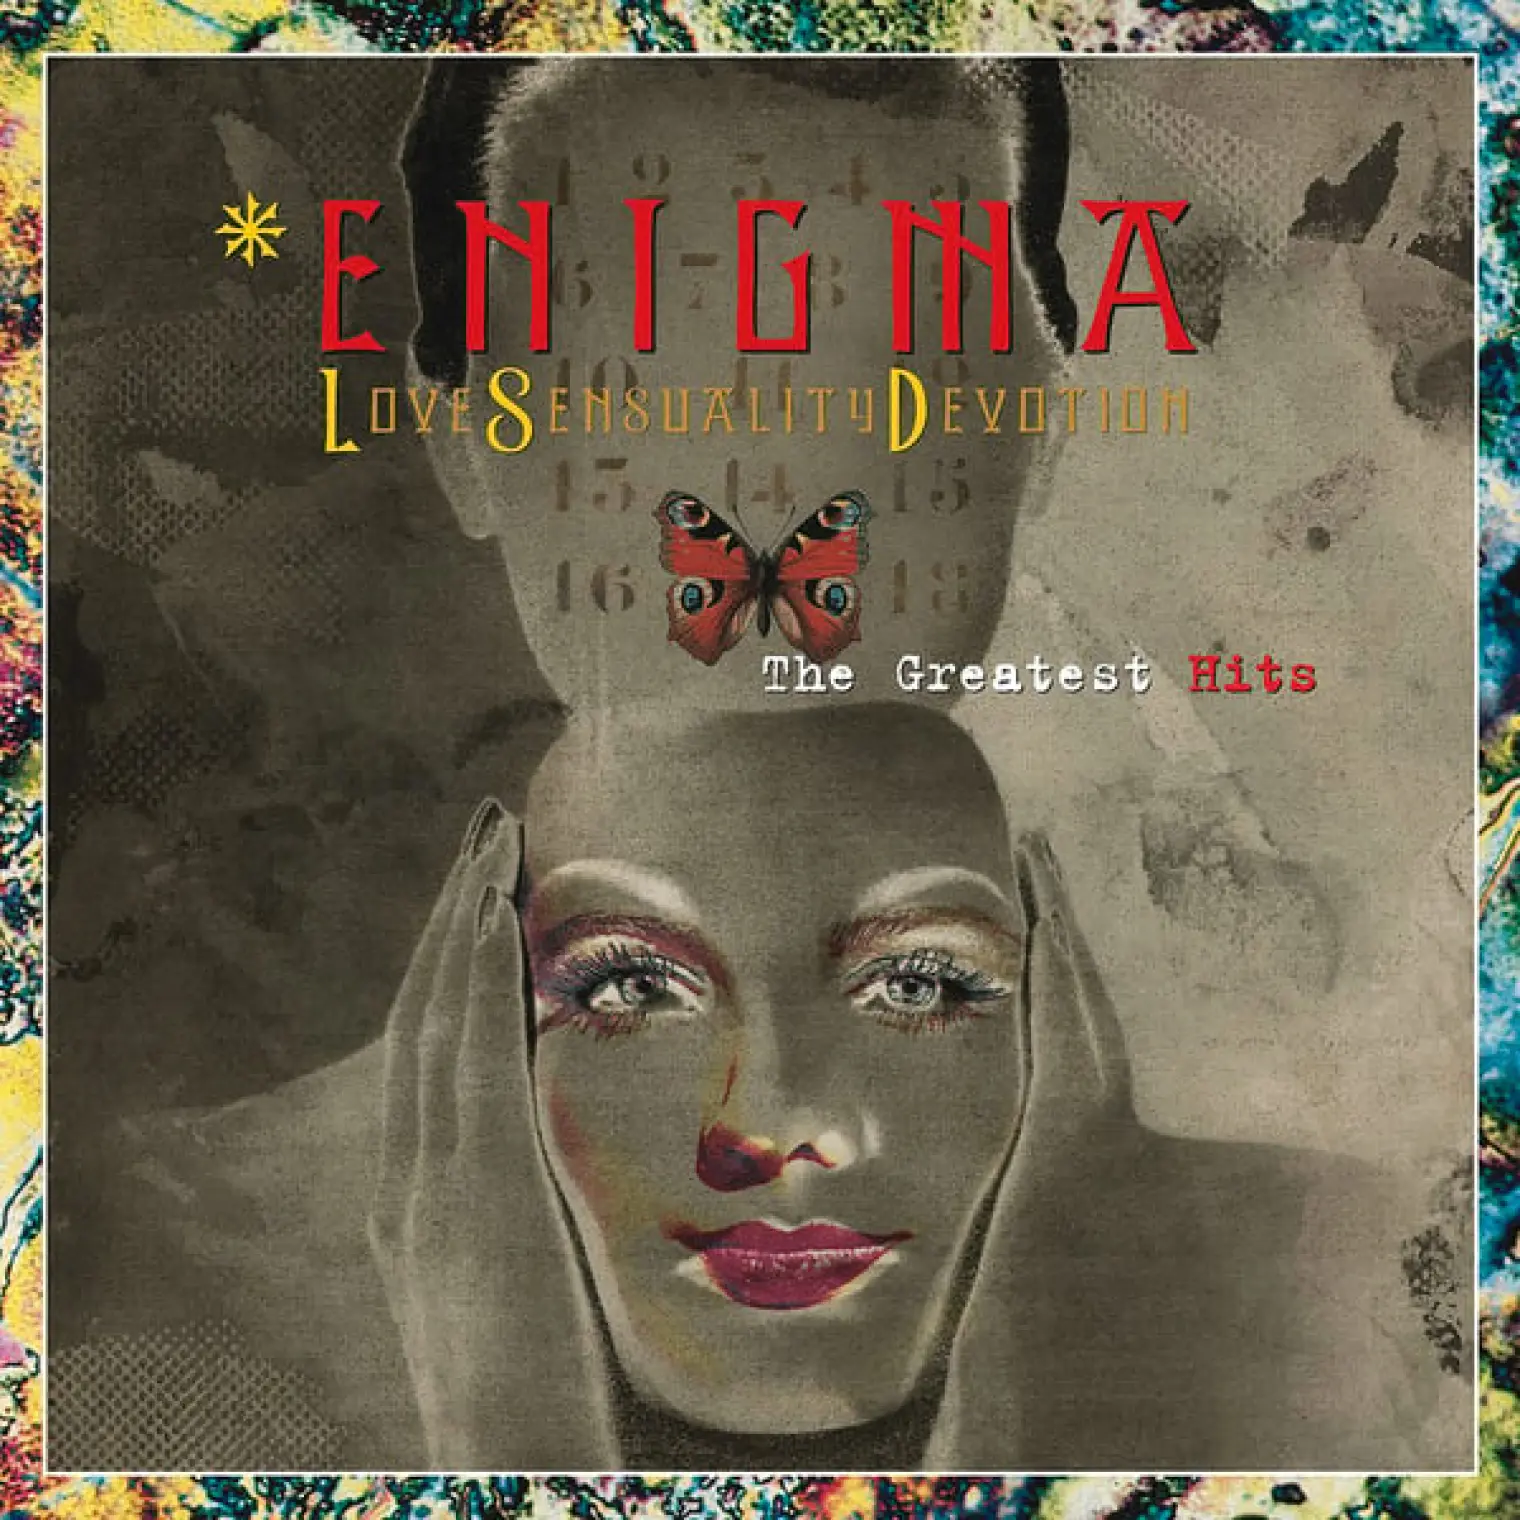 Love Sensuality Devotion: The Greatest Hits -  Enigma 